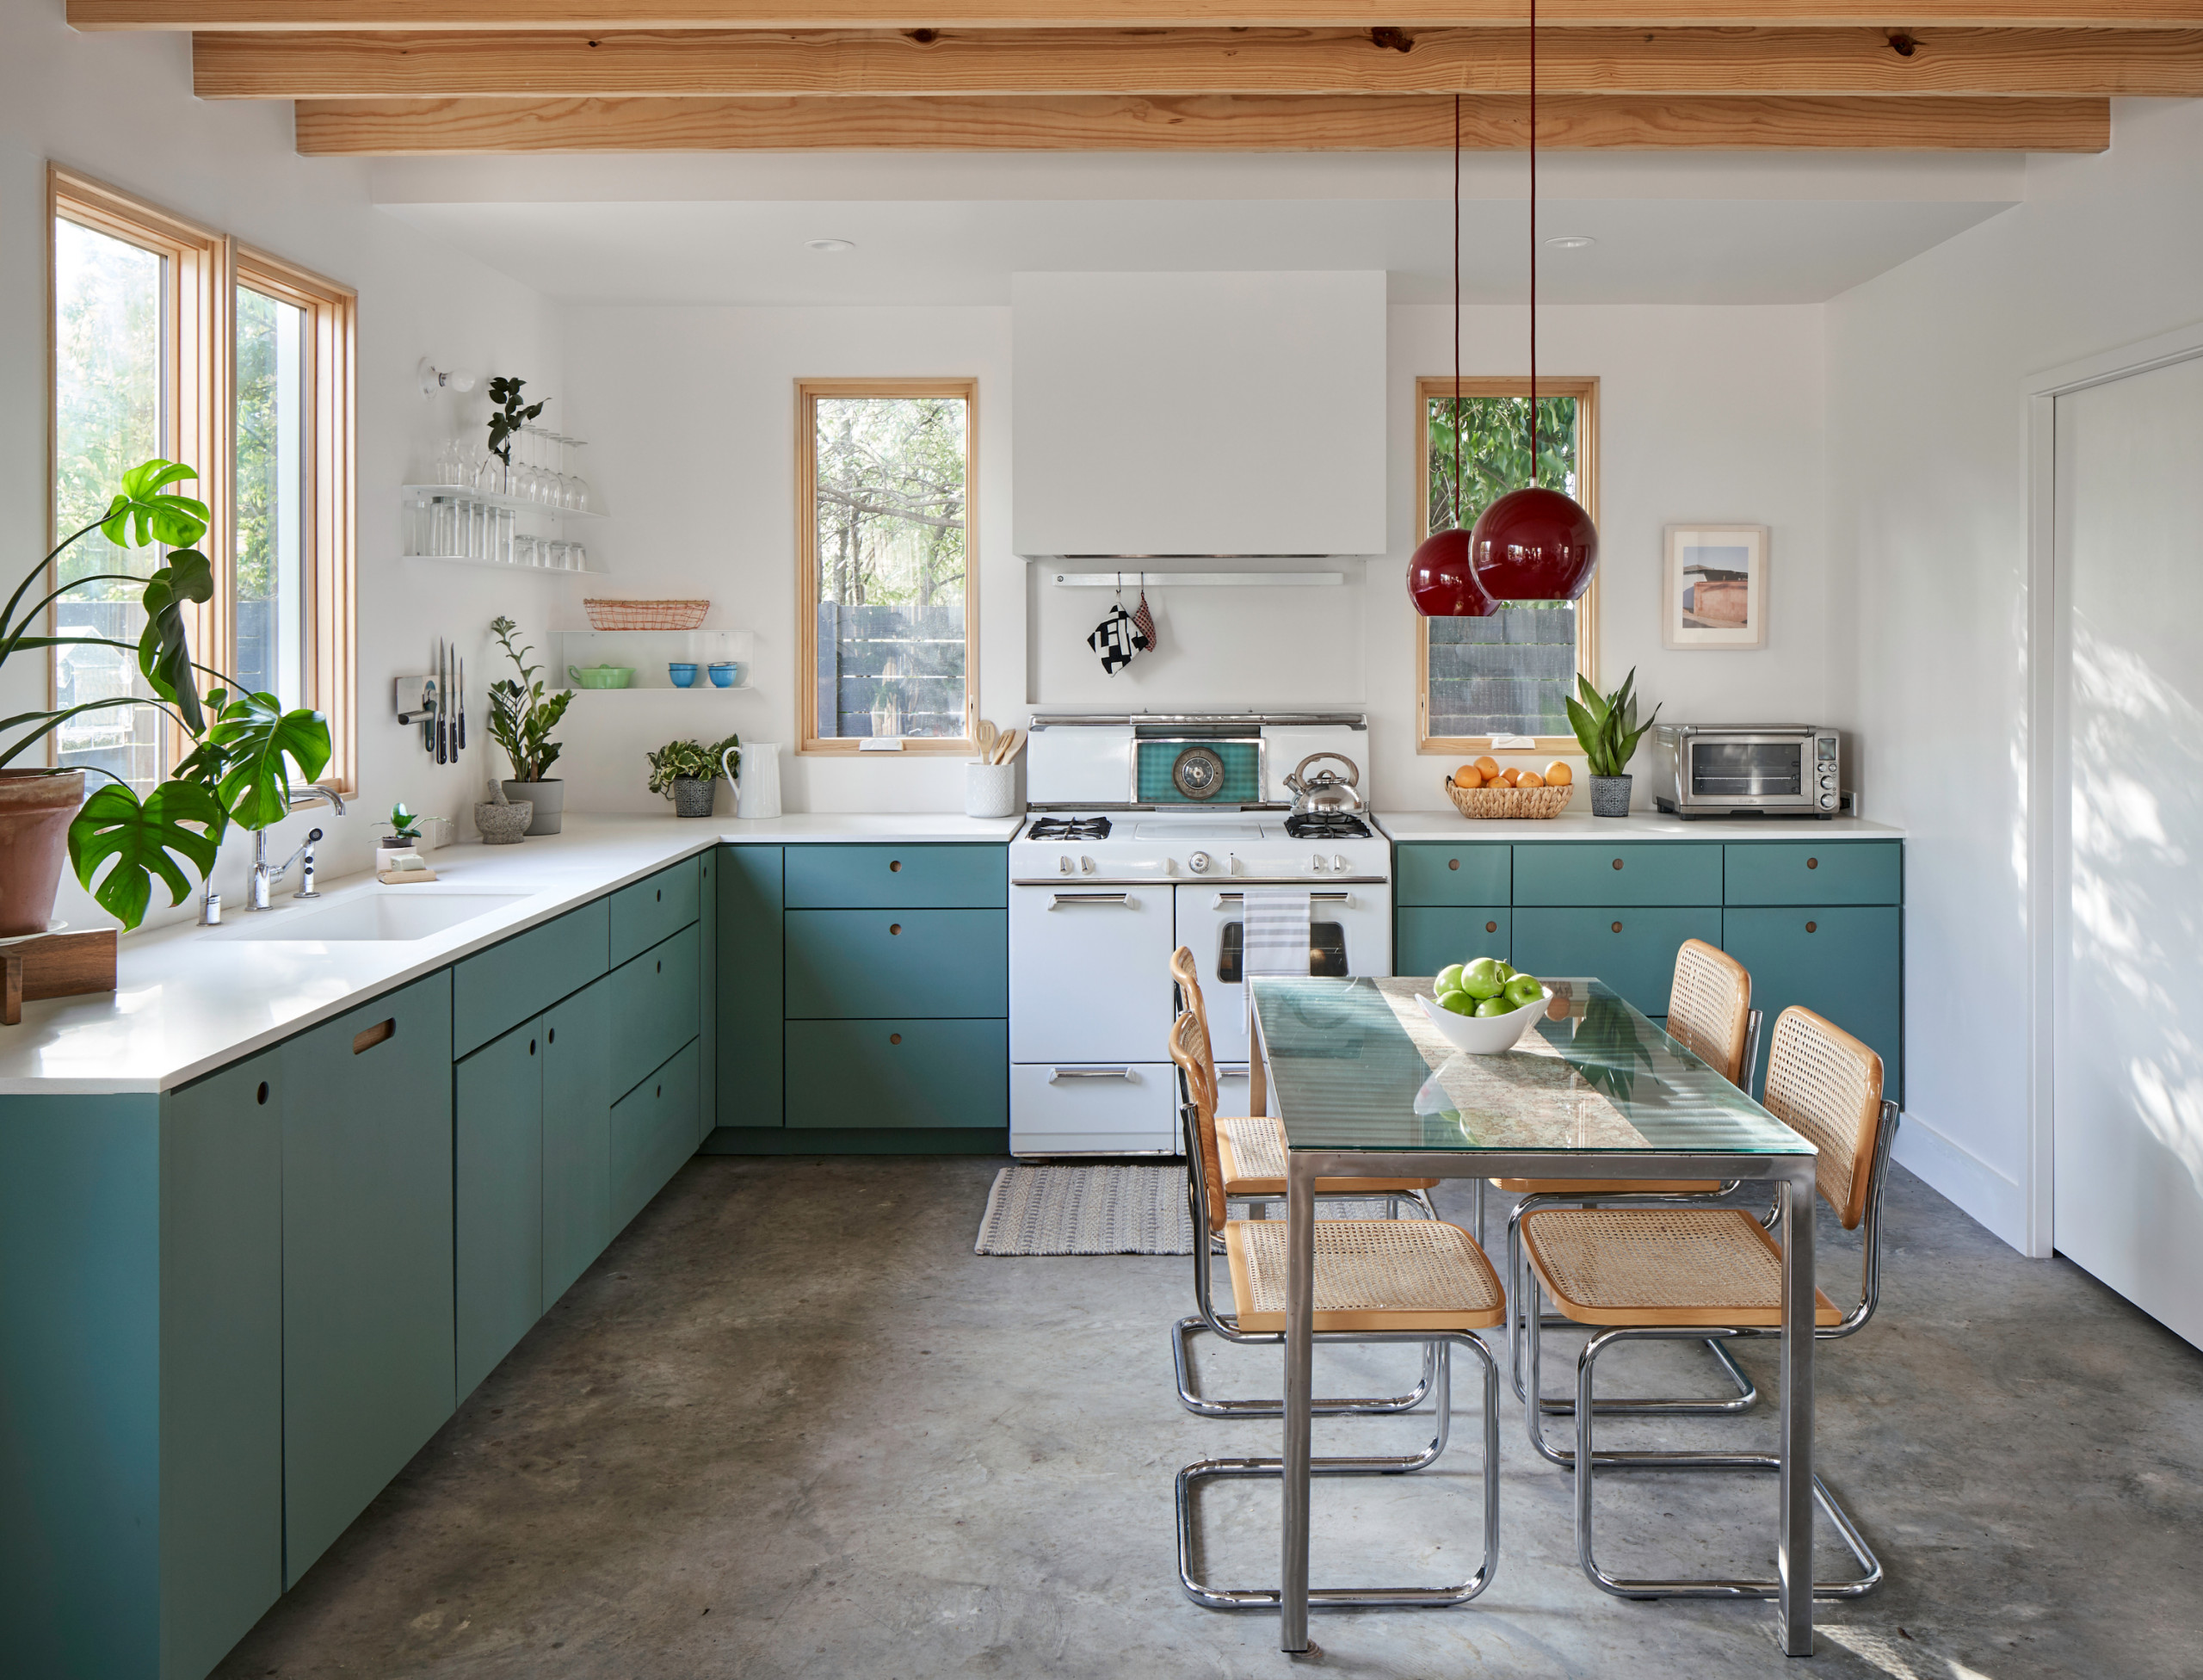 https://st.hzcdn.com/simgs/pictures/kitchens/boho-kitchen-with-green-painted-cabinets-paper-moon-painting-img~9cd1be2e0deac8b3_14-0238-1-cc6c283.jpg